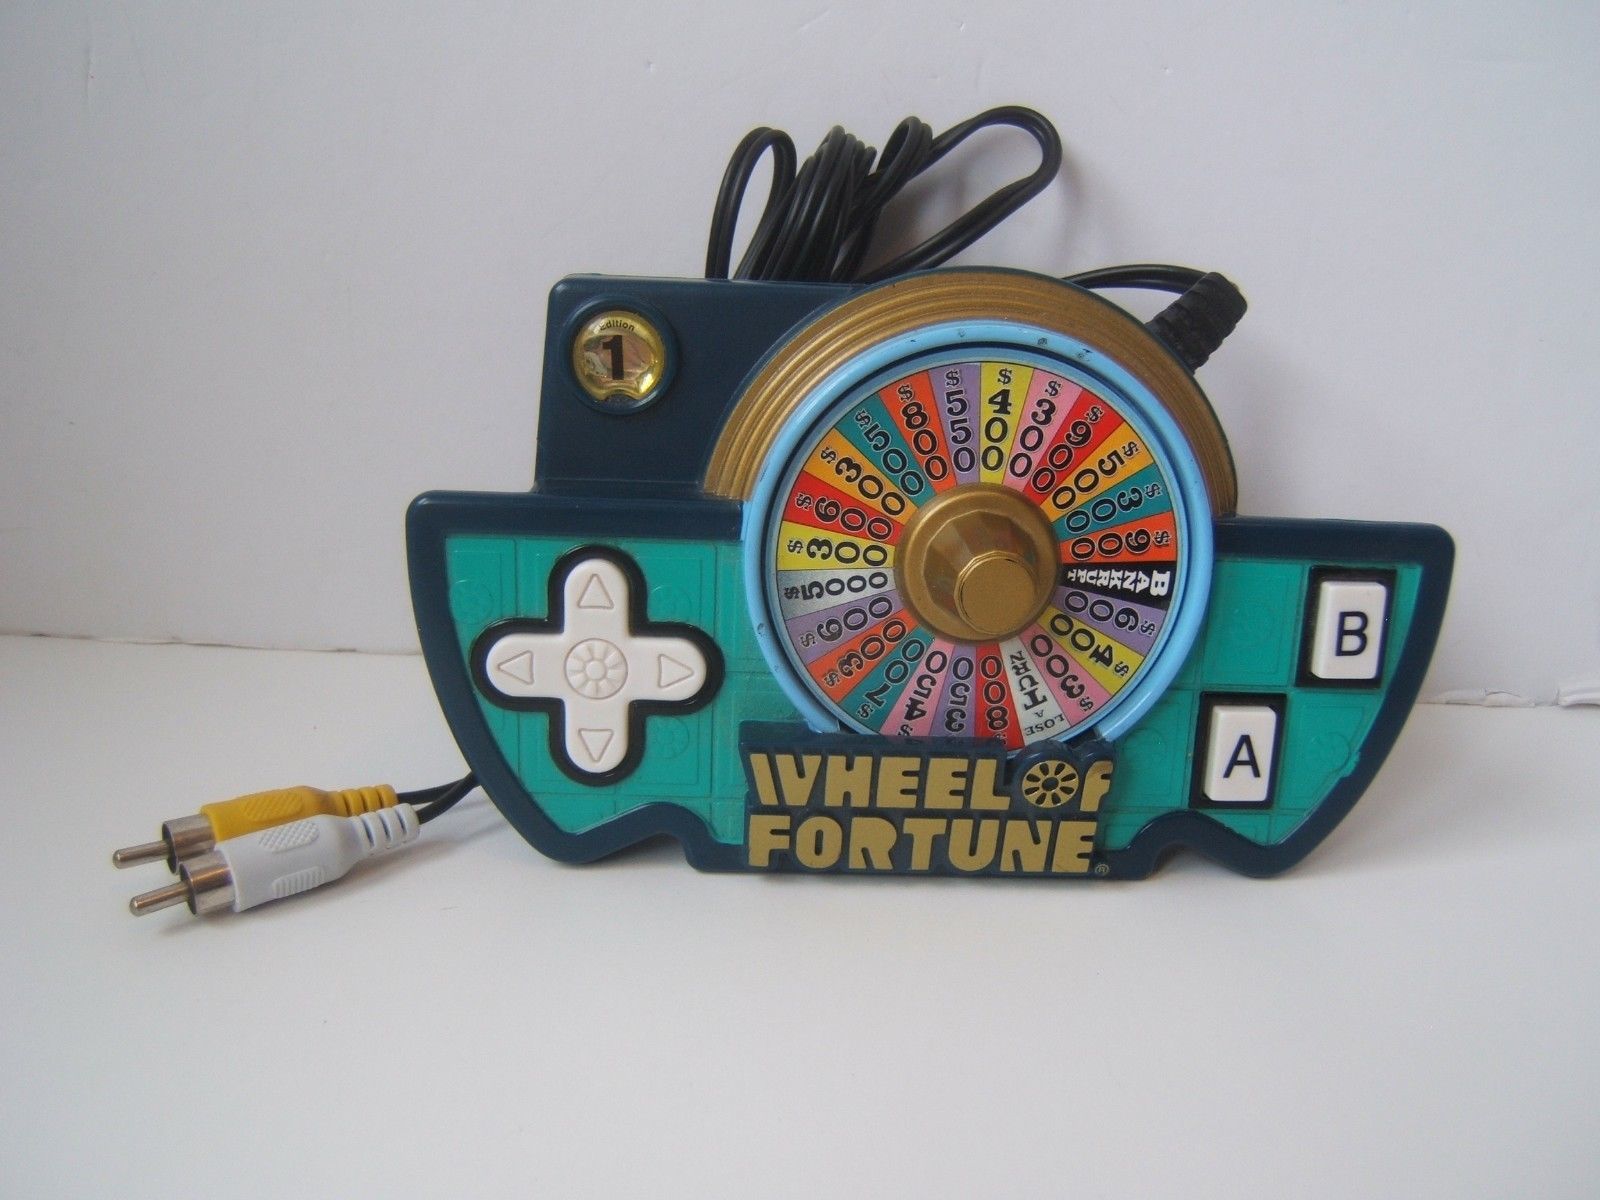 Wheel of Fortune Plug and Play Electronic Handheld TV Game Tested Works Jakks 05 - $19.21